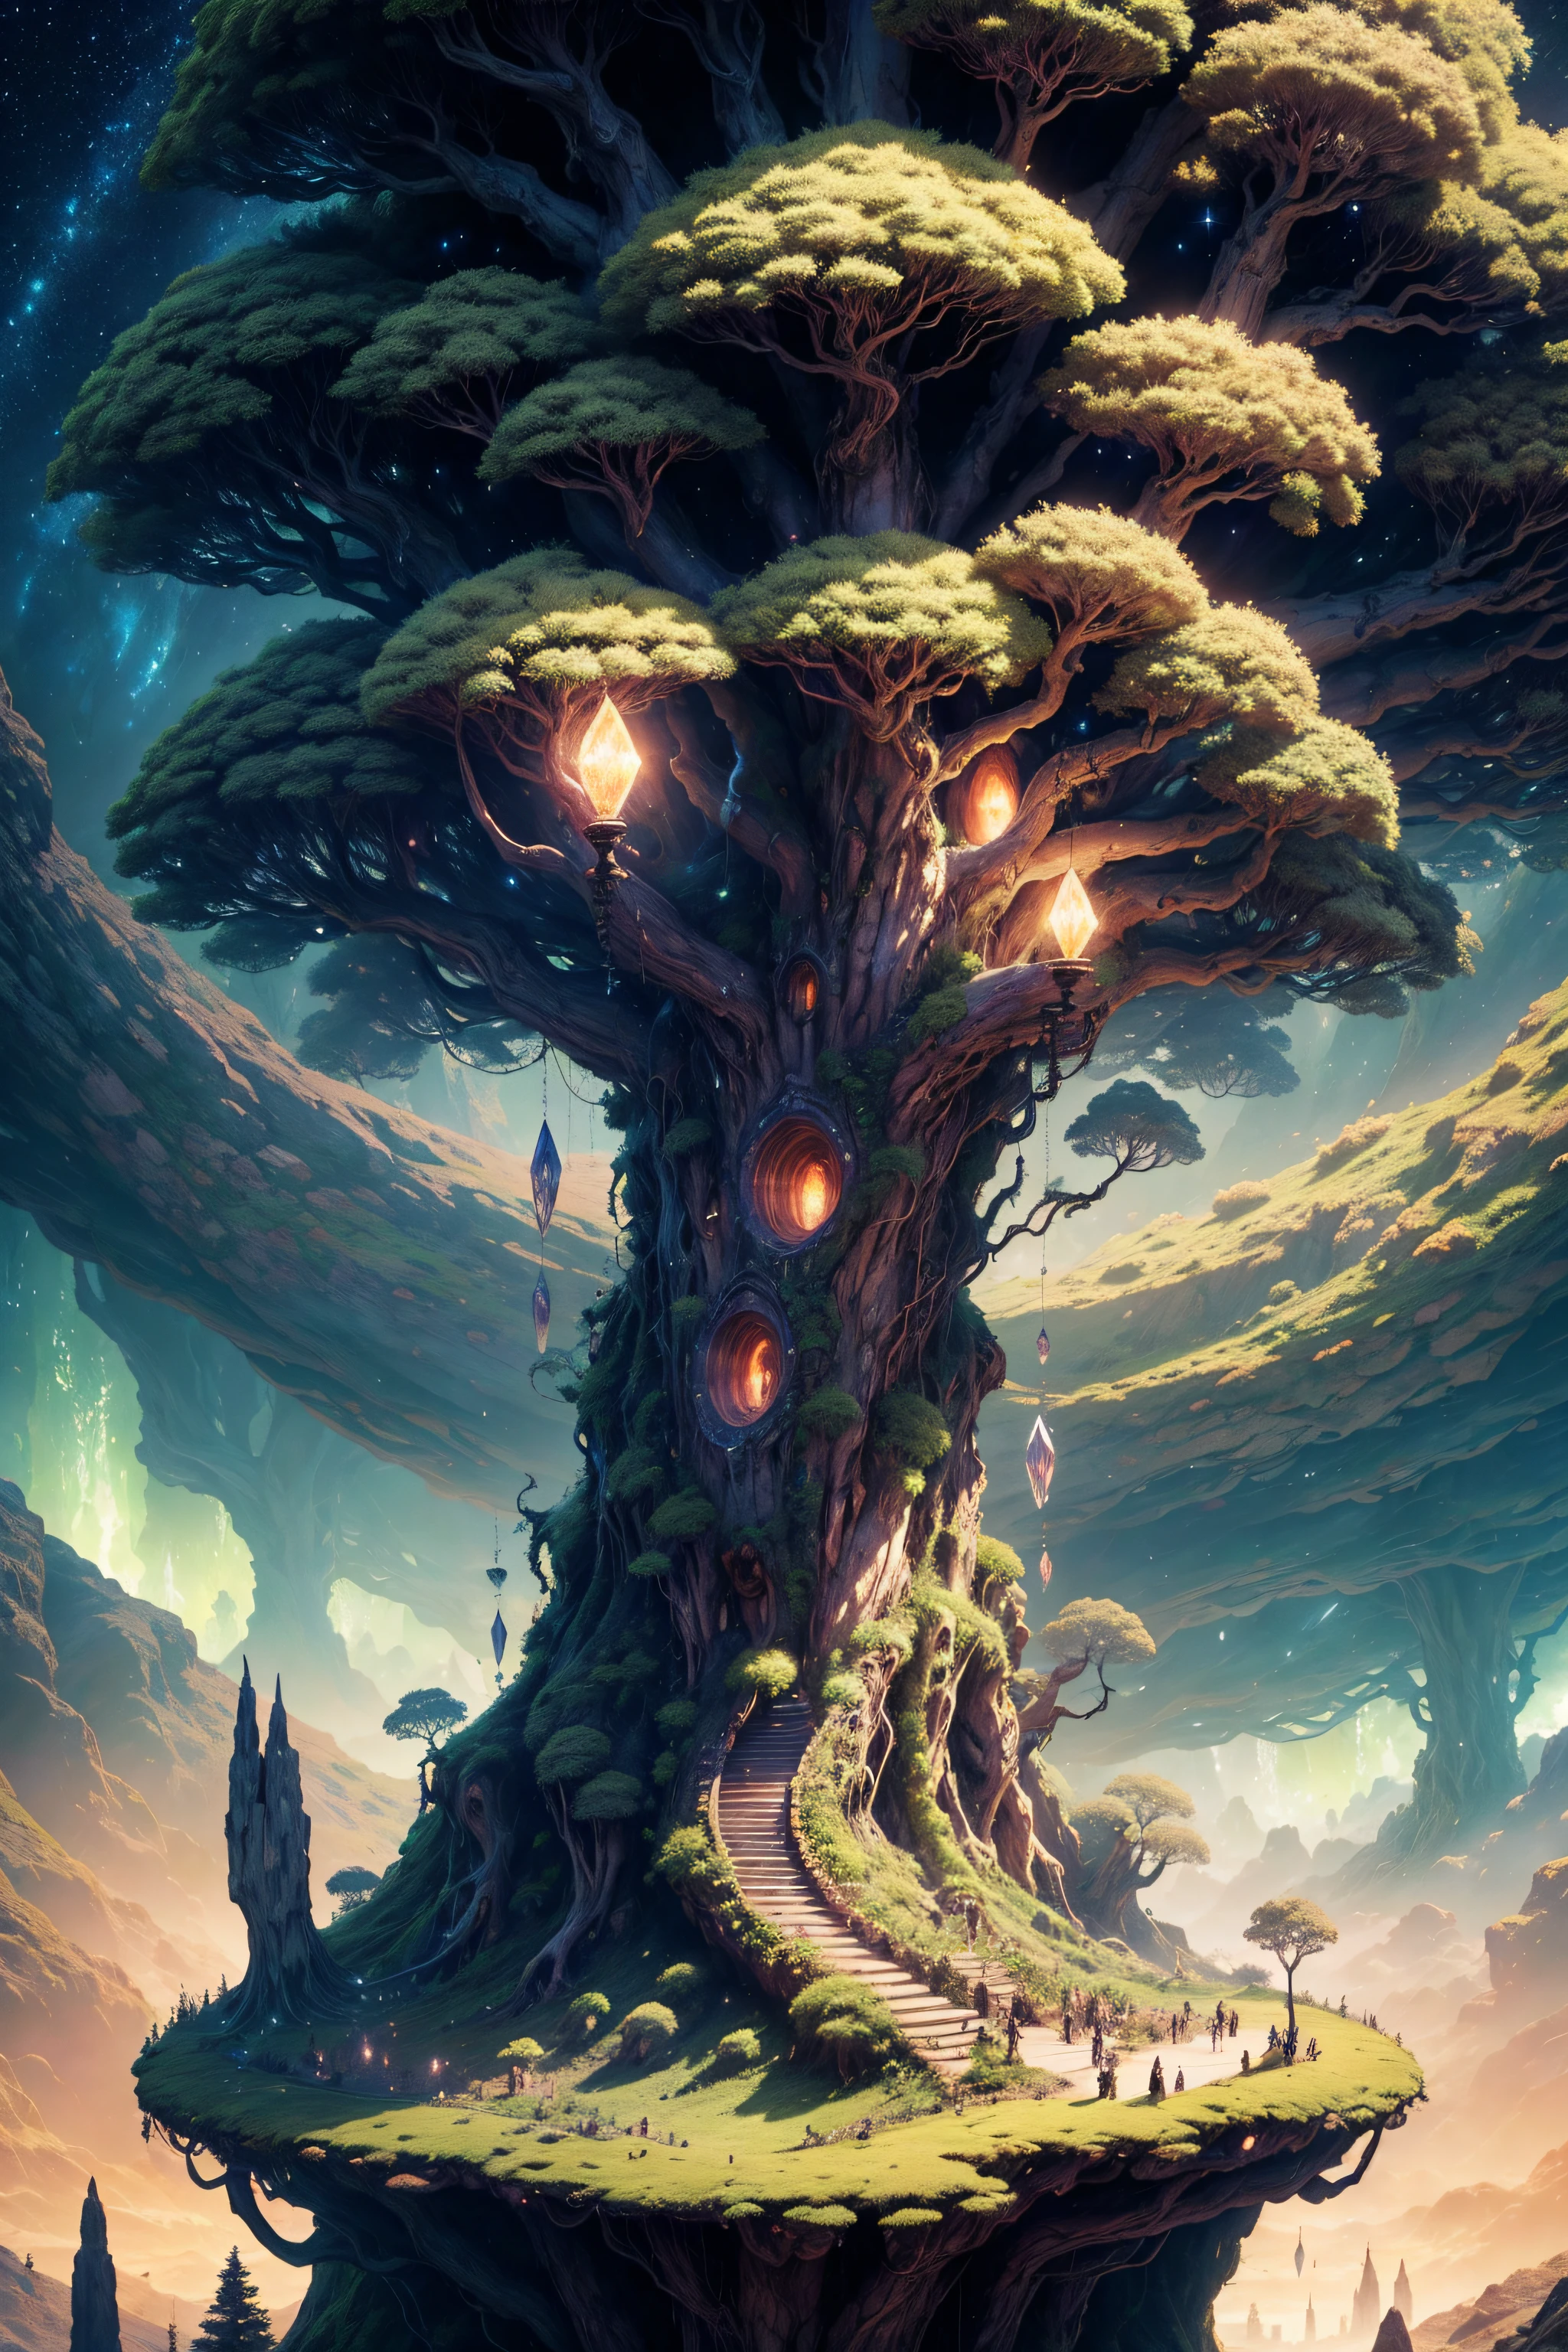 Illustration hyper-realistic, otherworldly, The World Tree, A large elven tree, Yggdrasil, fentezi, Flora and fauna, very green, woods, An incredibly large tree rises on top of all the trees, ultra-celestial scene with a giant full-length crystal tree, Very detailed and magical lighting, intricate forest details, vegetation and the river around, Sunny punk, Scenery, a giant tree, beautiful deciduous with beautiful lighting and realistic proportions, As if it were a cinematic backdrop, 8k, topquality, tmasterpiece, Clouds and stars in the sky.